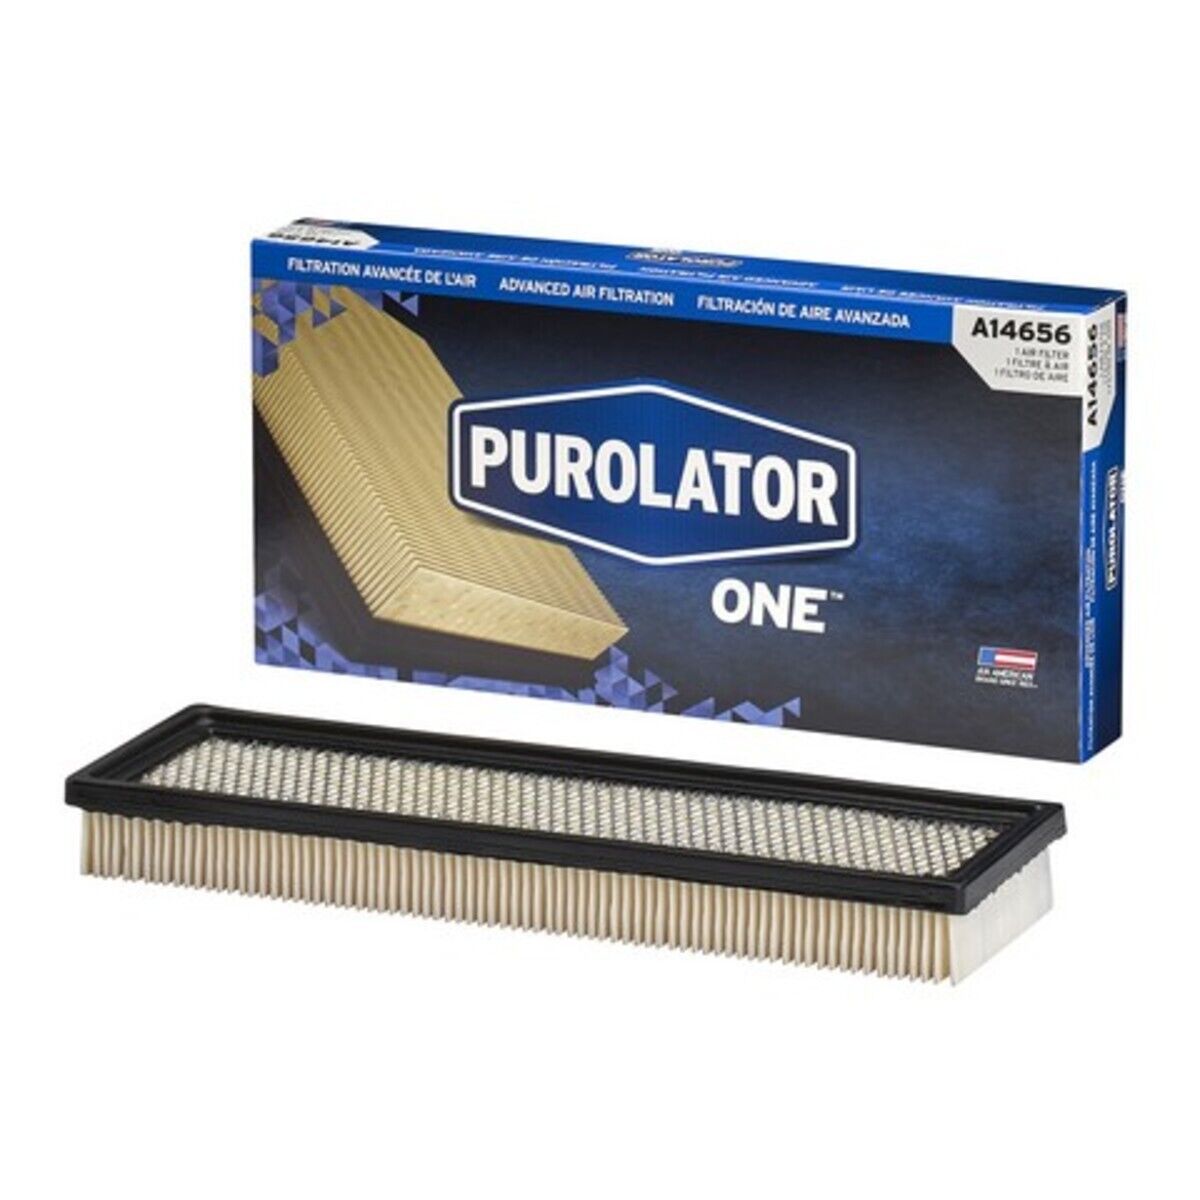 A14656 Purolator Air Filter for Chevy Olds Chevrolet Caprice Buick Roadmaster